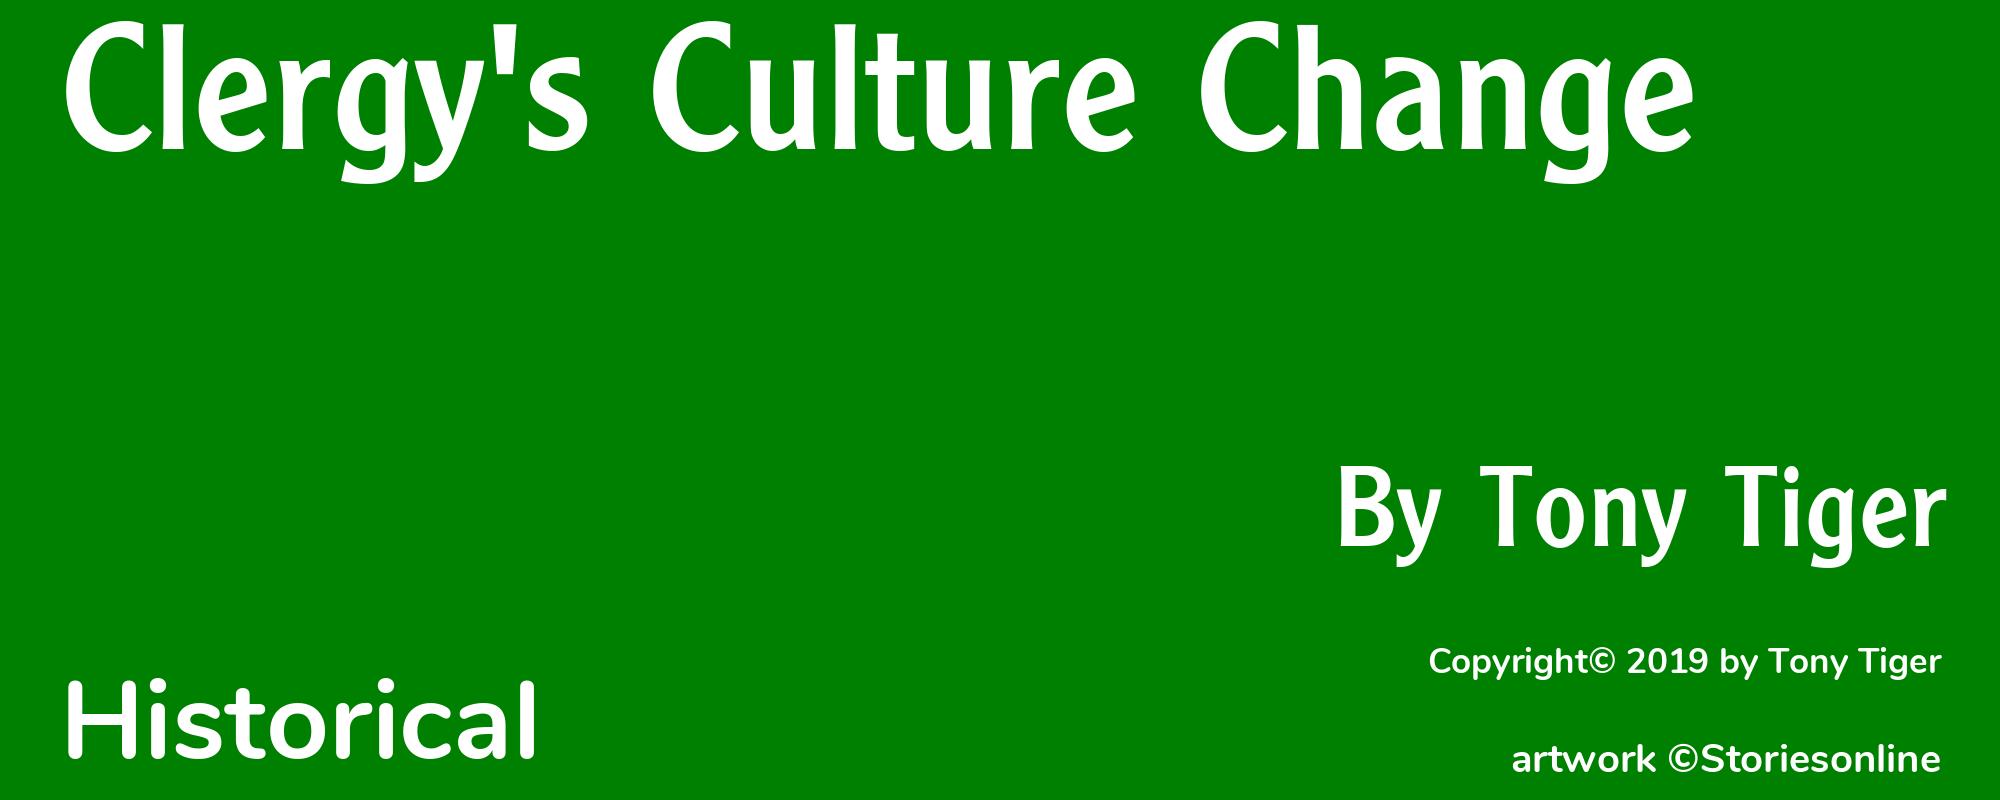 Clergy's Culture Change - Cover